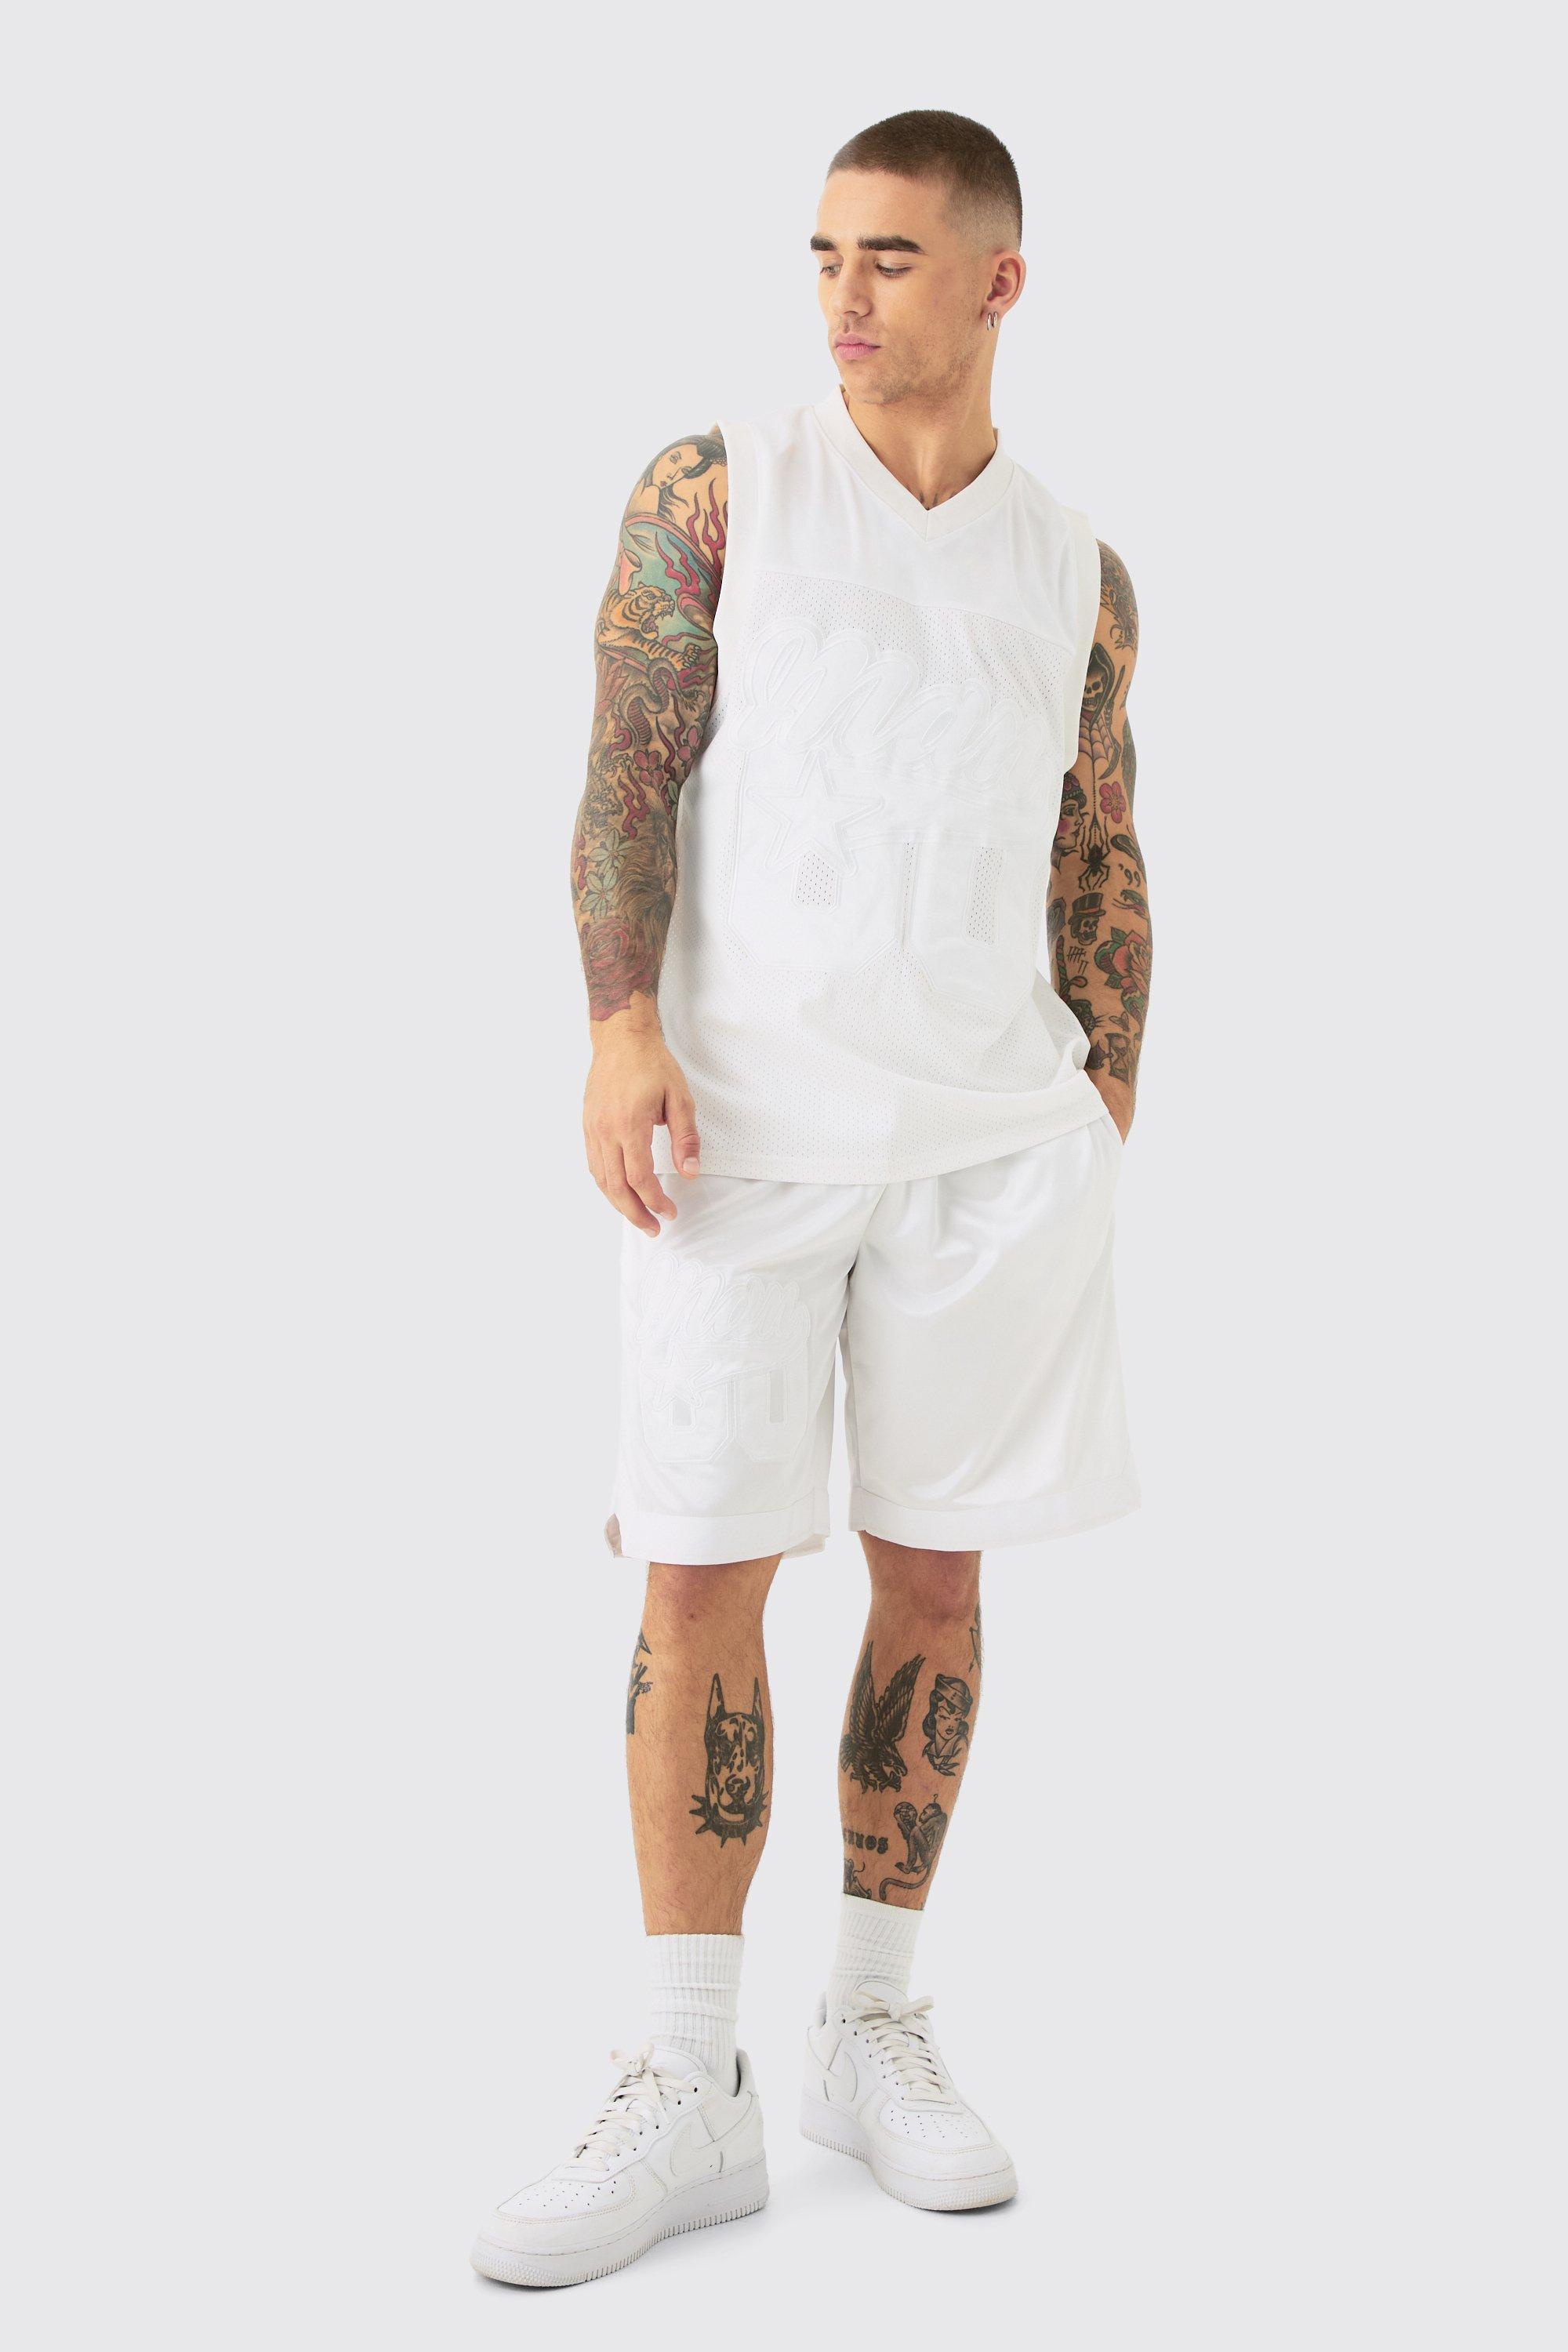 Image of Mesh And Satin Basketball Applique Vest And Short Set, Grigio